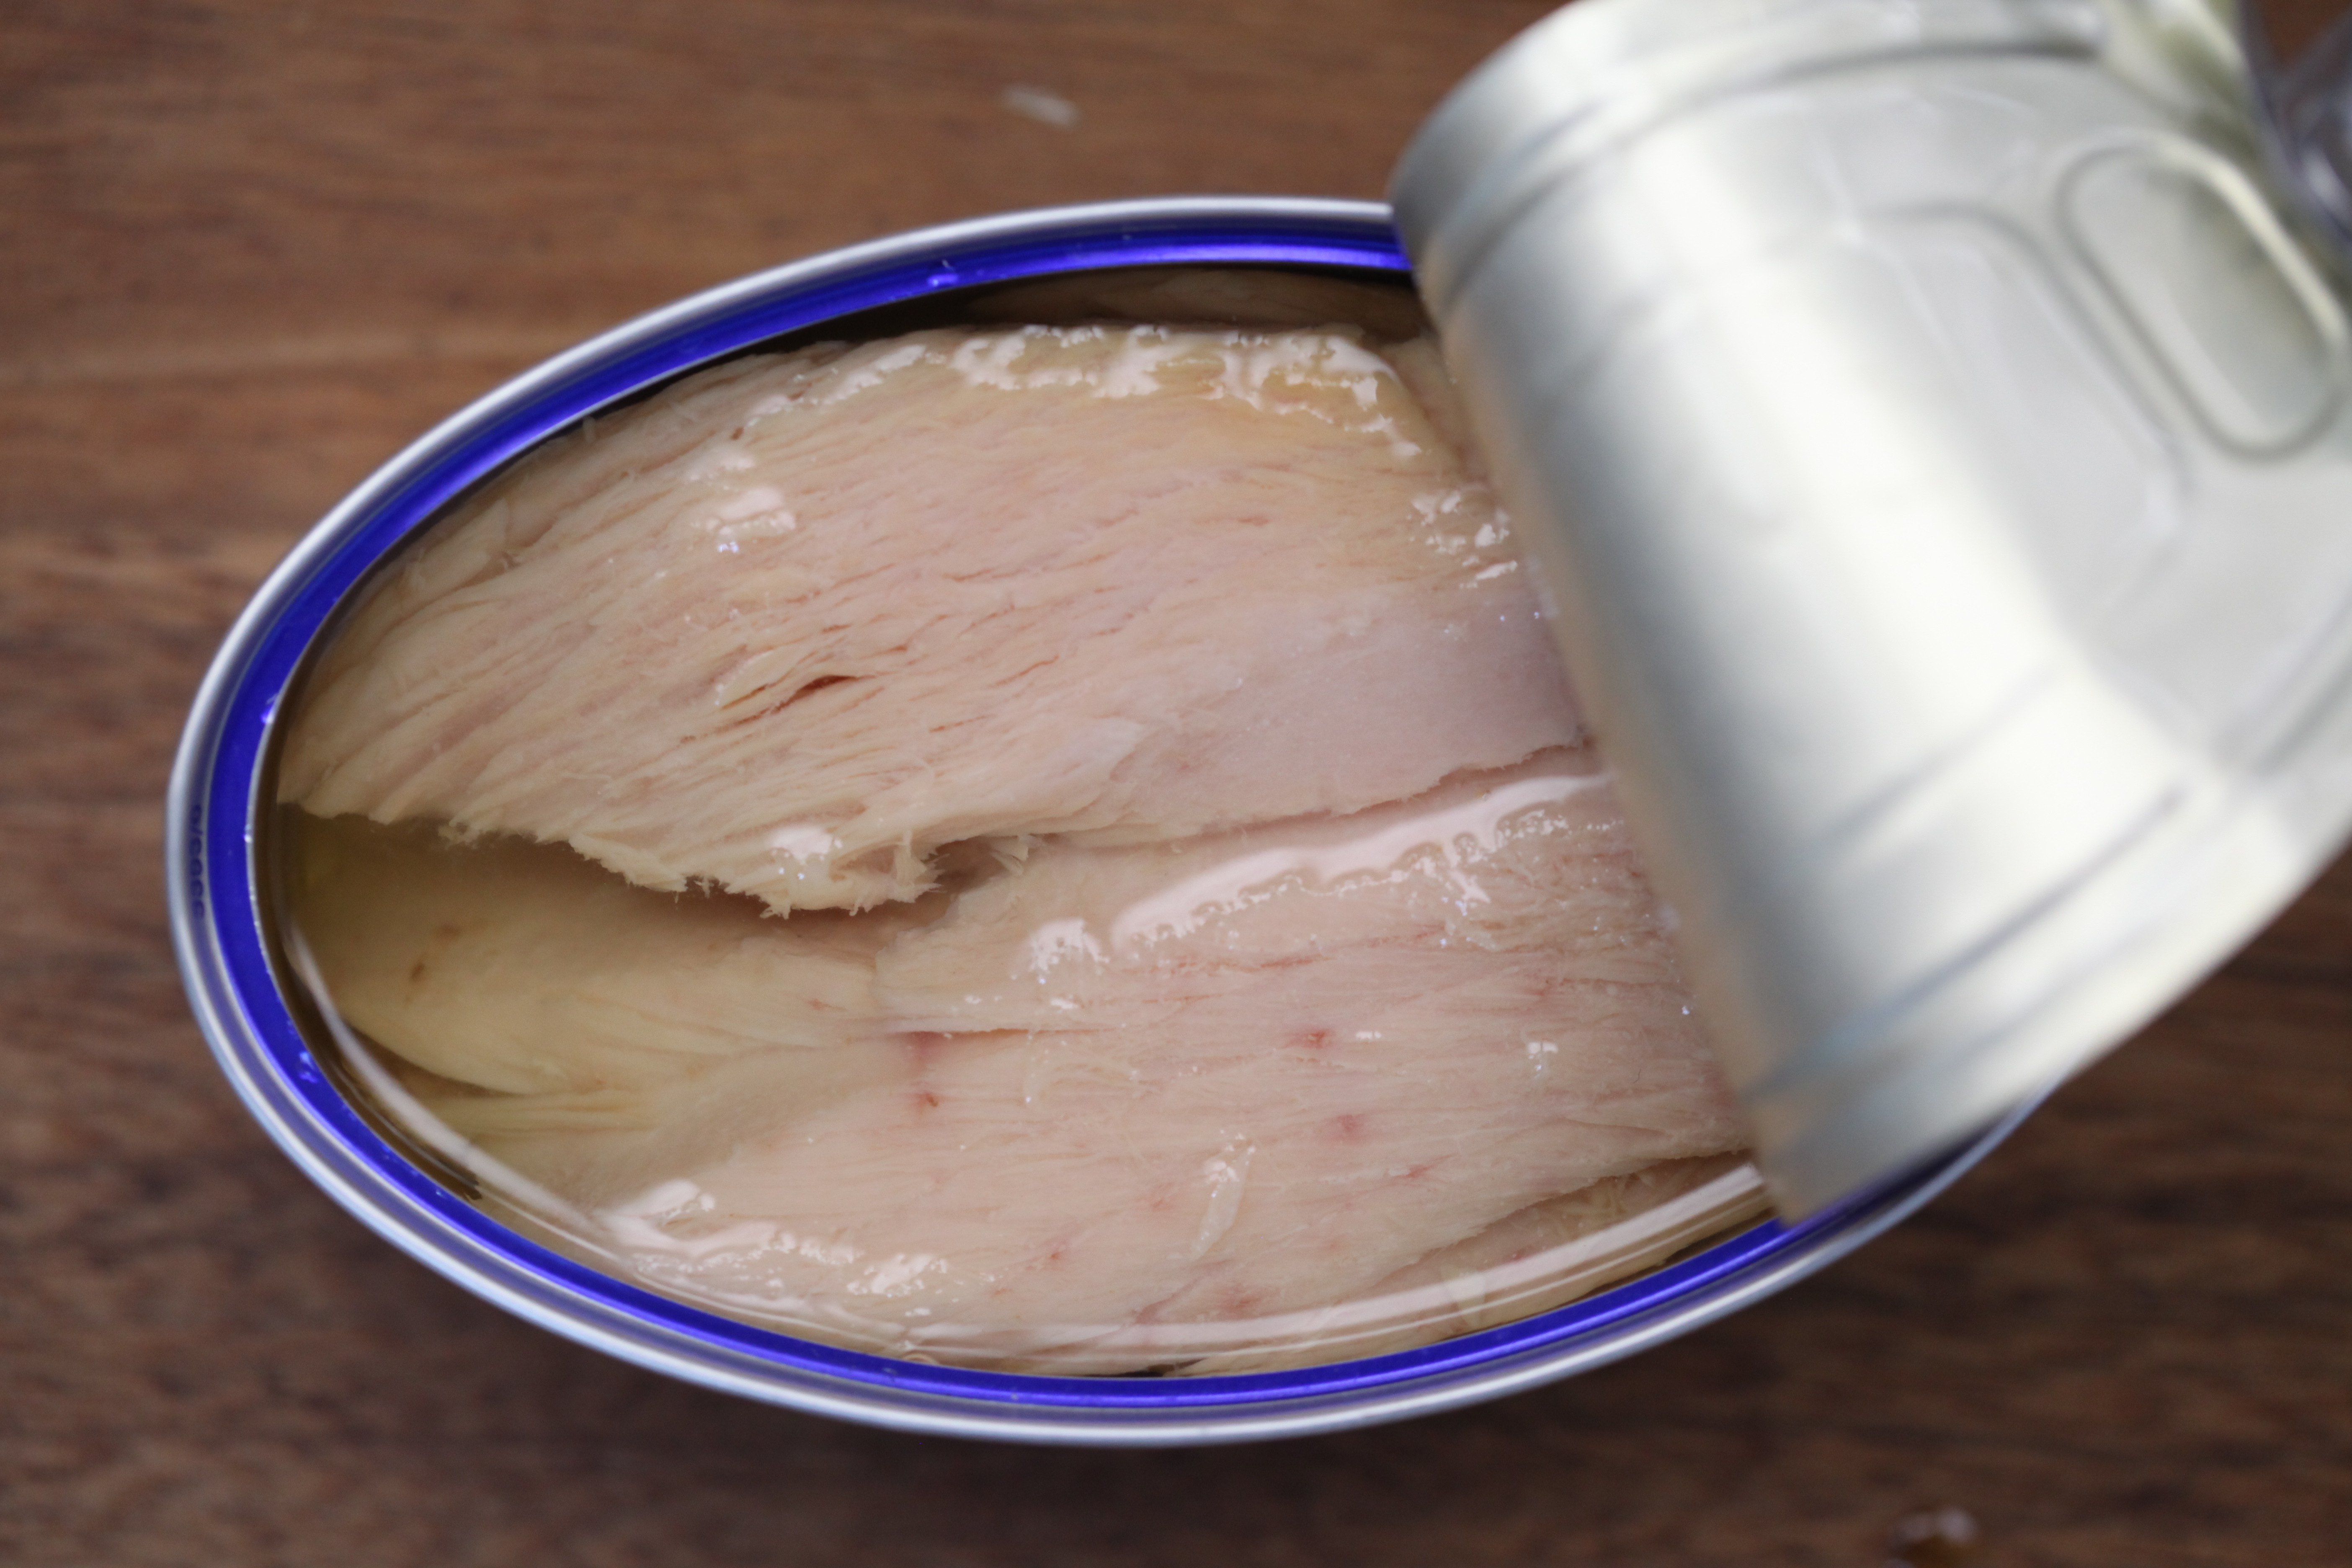 an open blue can of ventresca tuna, an oil-packed tuna that comes from the belly of the tuna